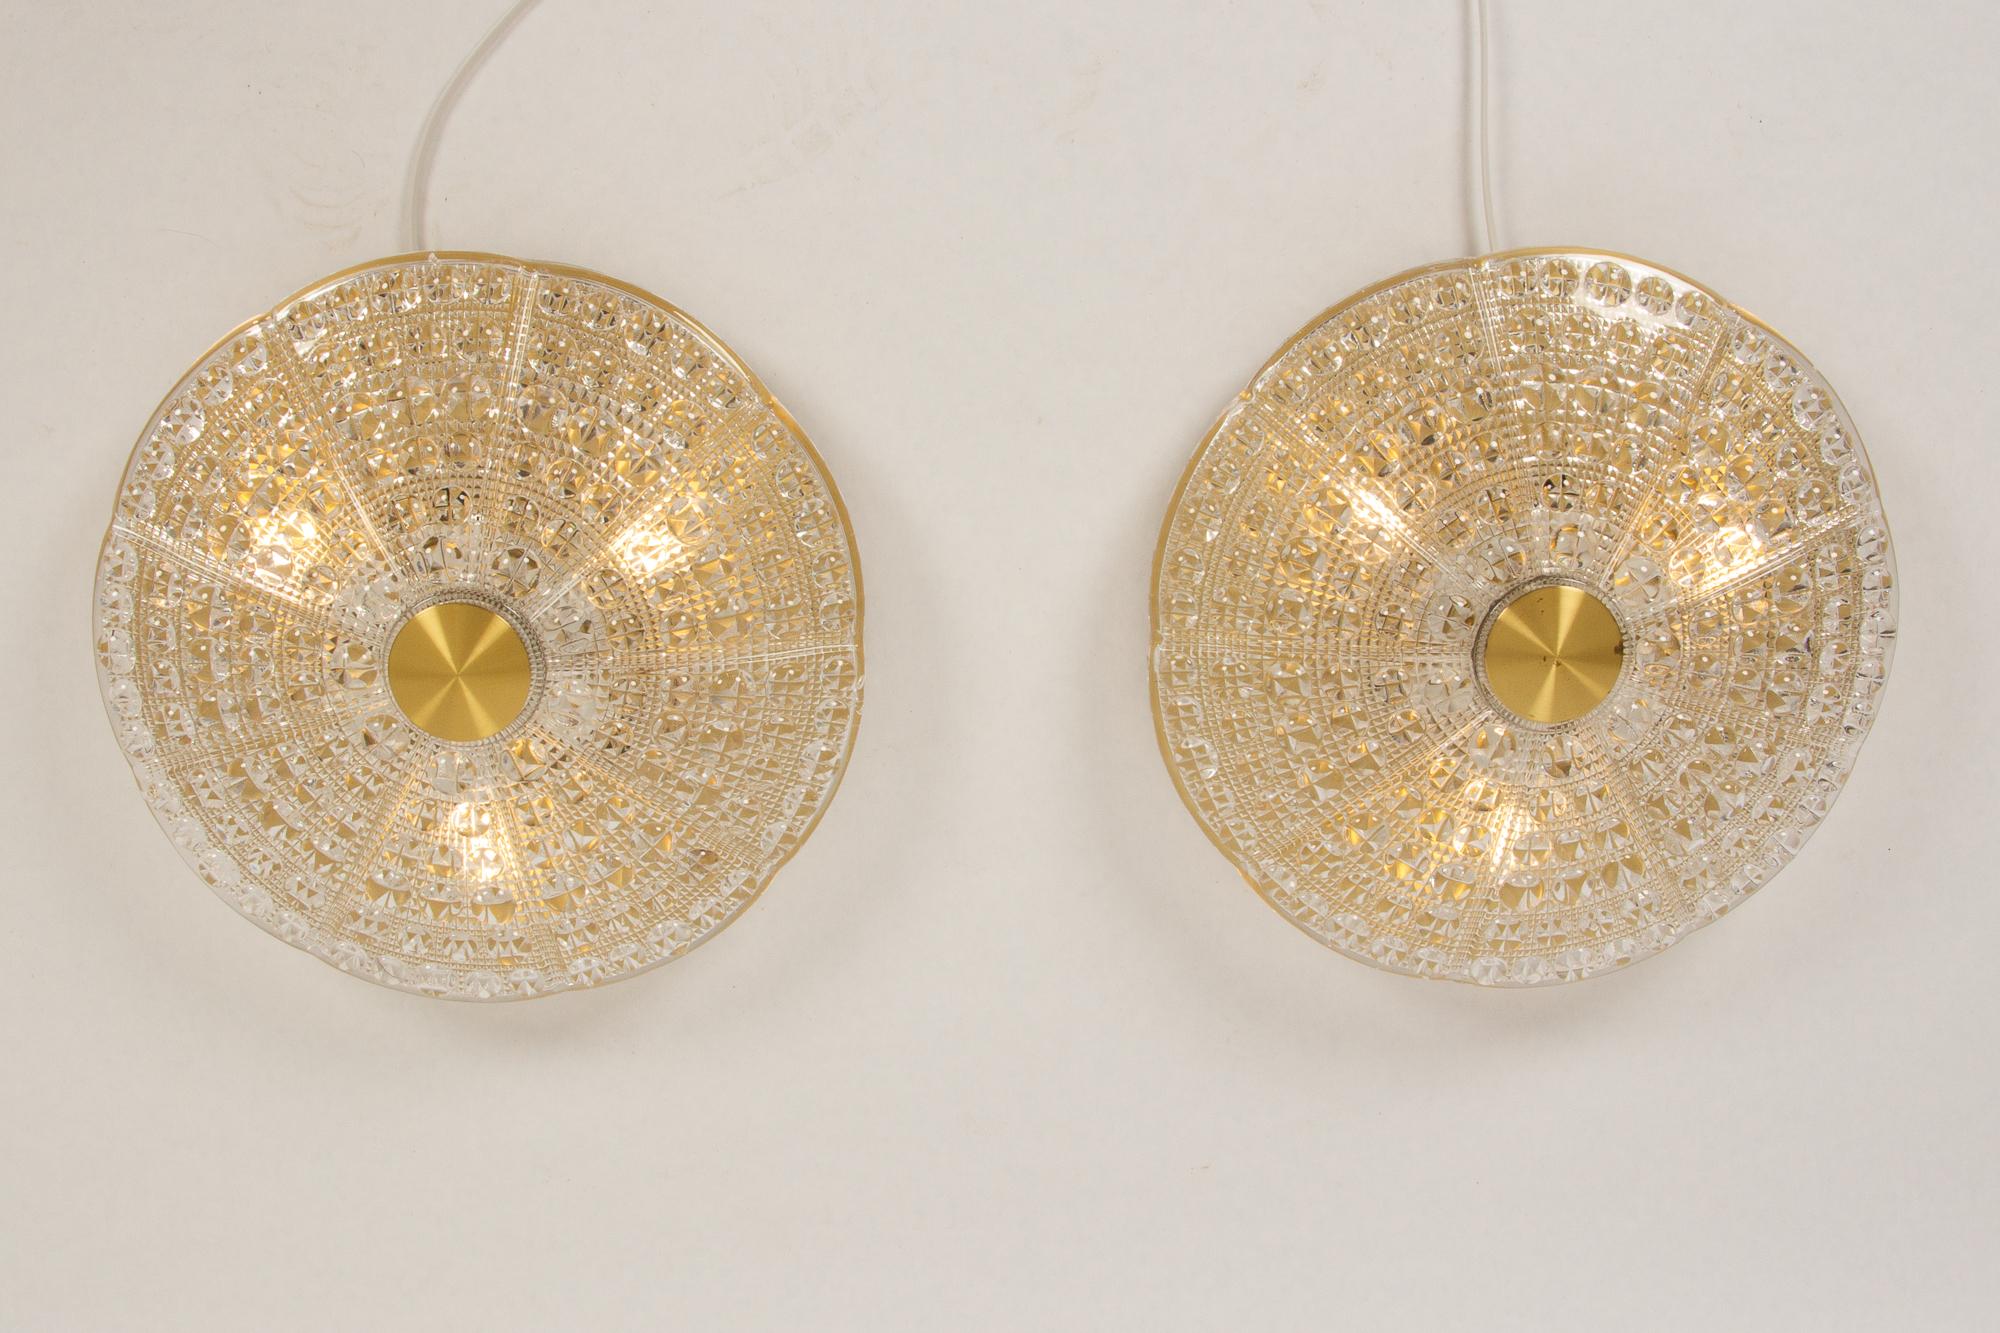 Pair of Danish vintage crystal flush mounted ceiling lamps by Carl Fagerlund for Lyfa, 1960s.
Large crystal glass shade from Orrefors mounted on brass plate. Six E14 sockets arranged in a star. For mounting over ceiling or wall outlet.
One small